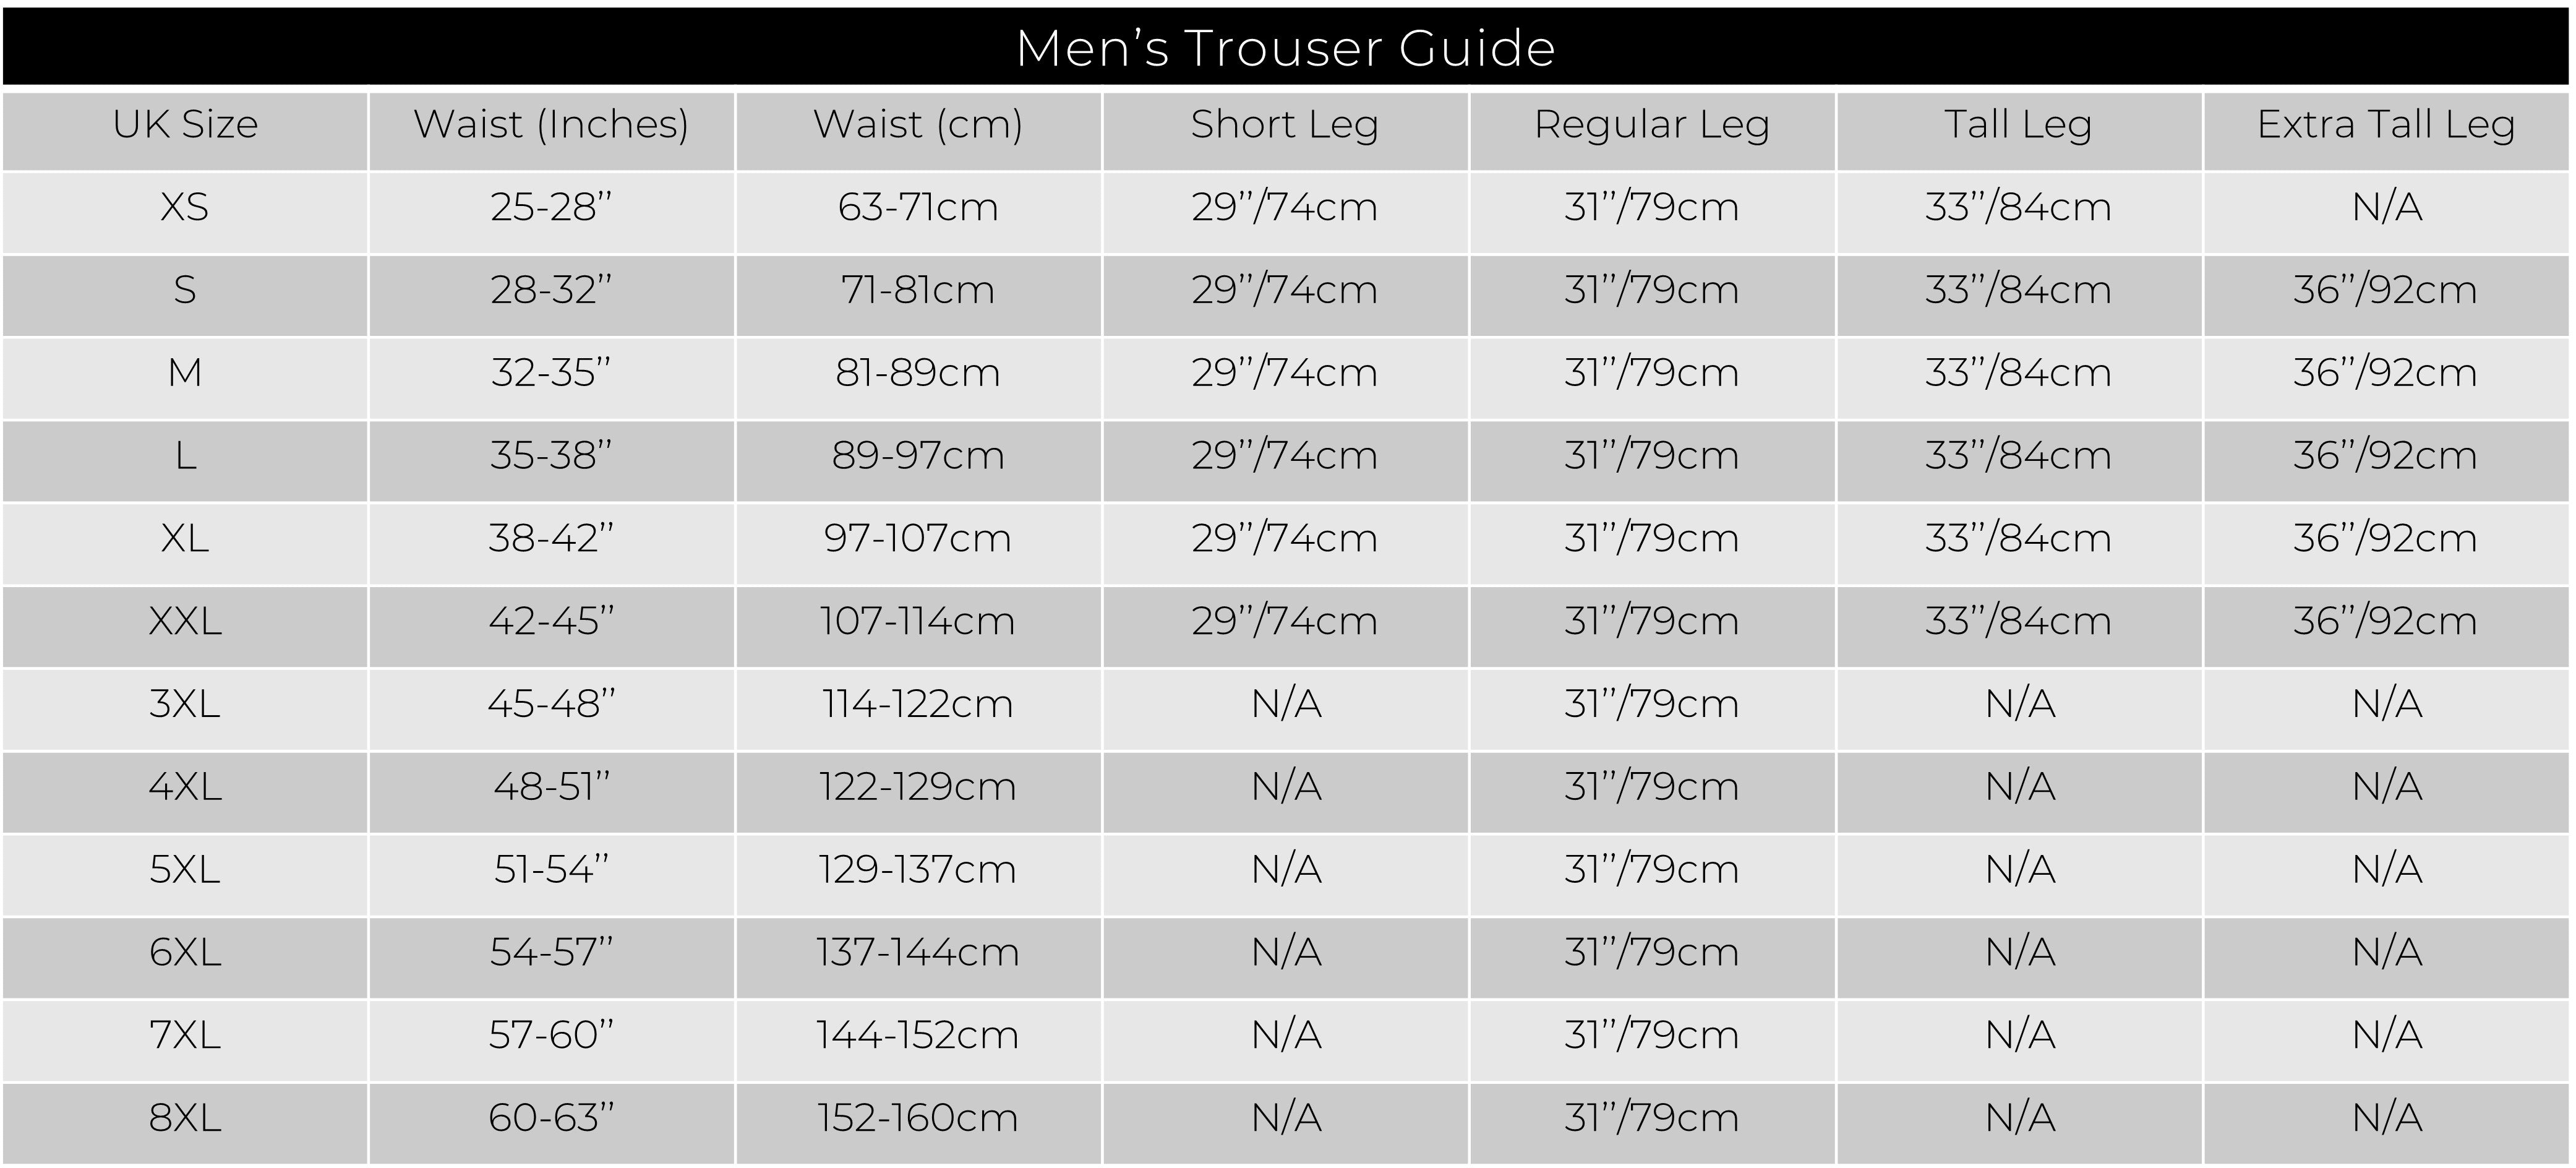 Adidas Mens Size Guide 2020